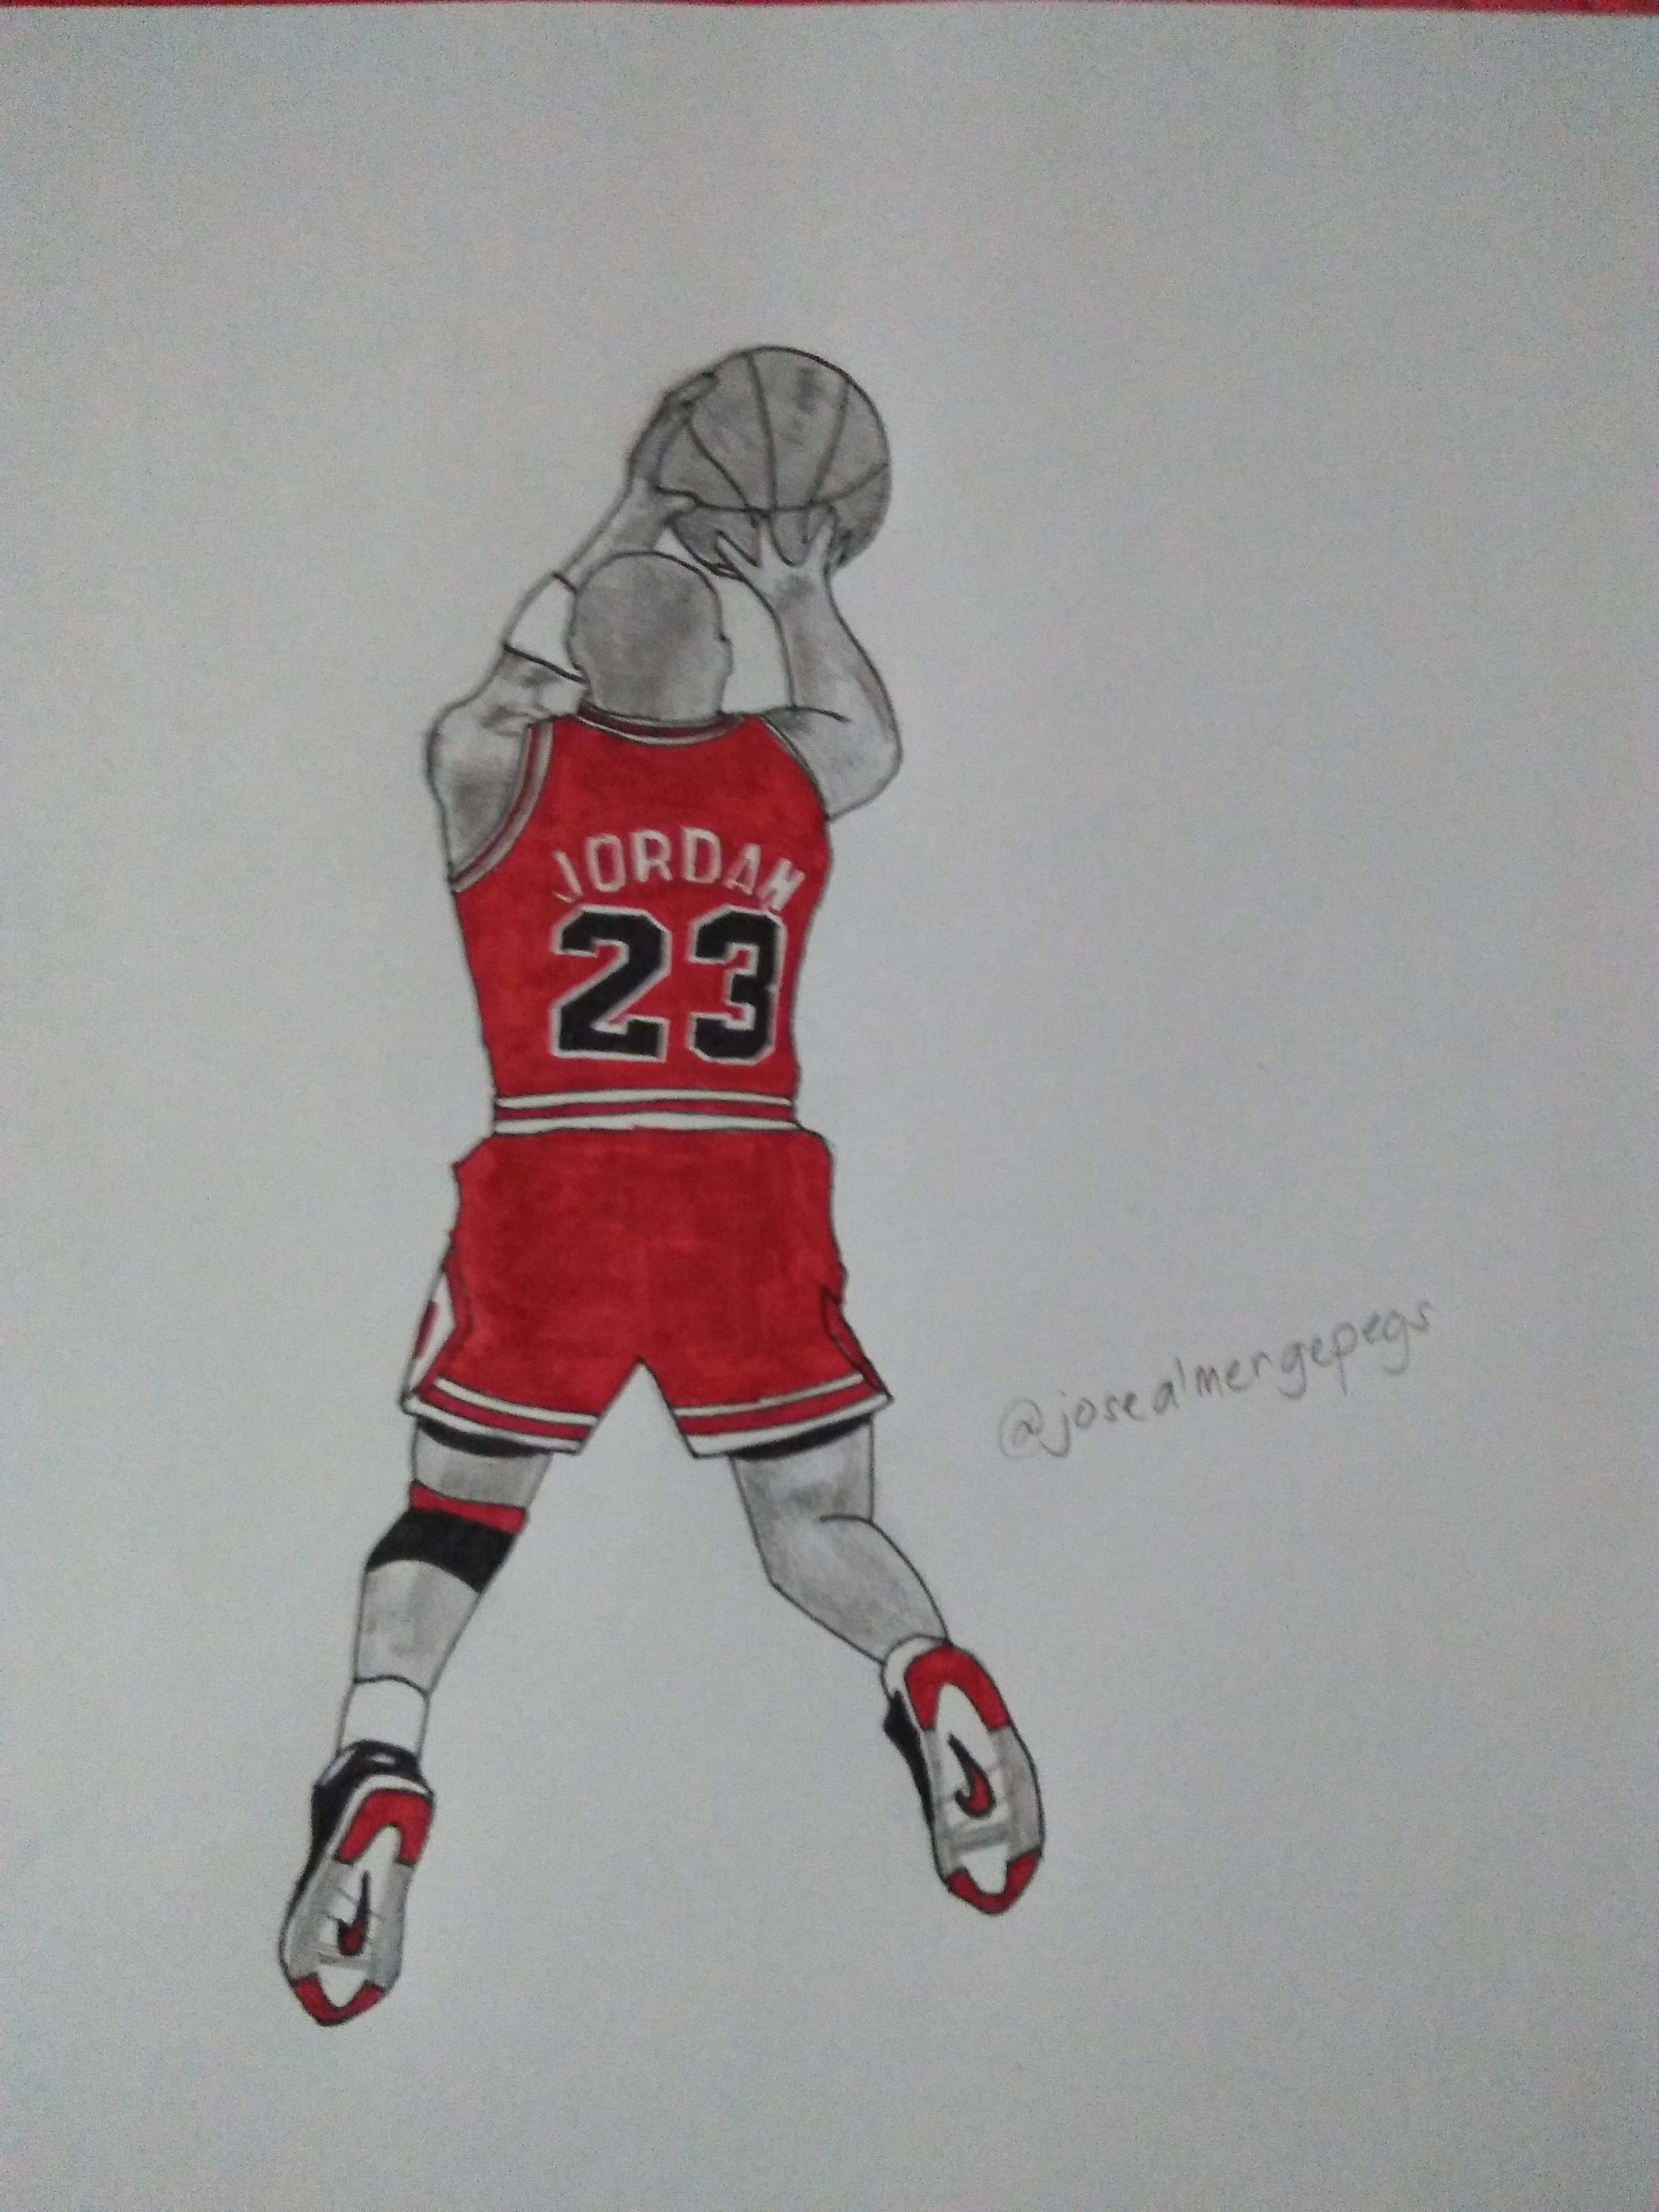 germ Contract Sympton how to draw michael jordan dunking step by step